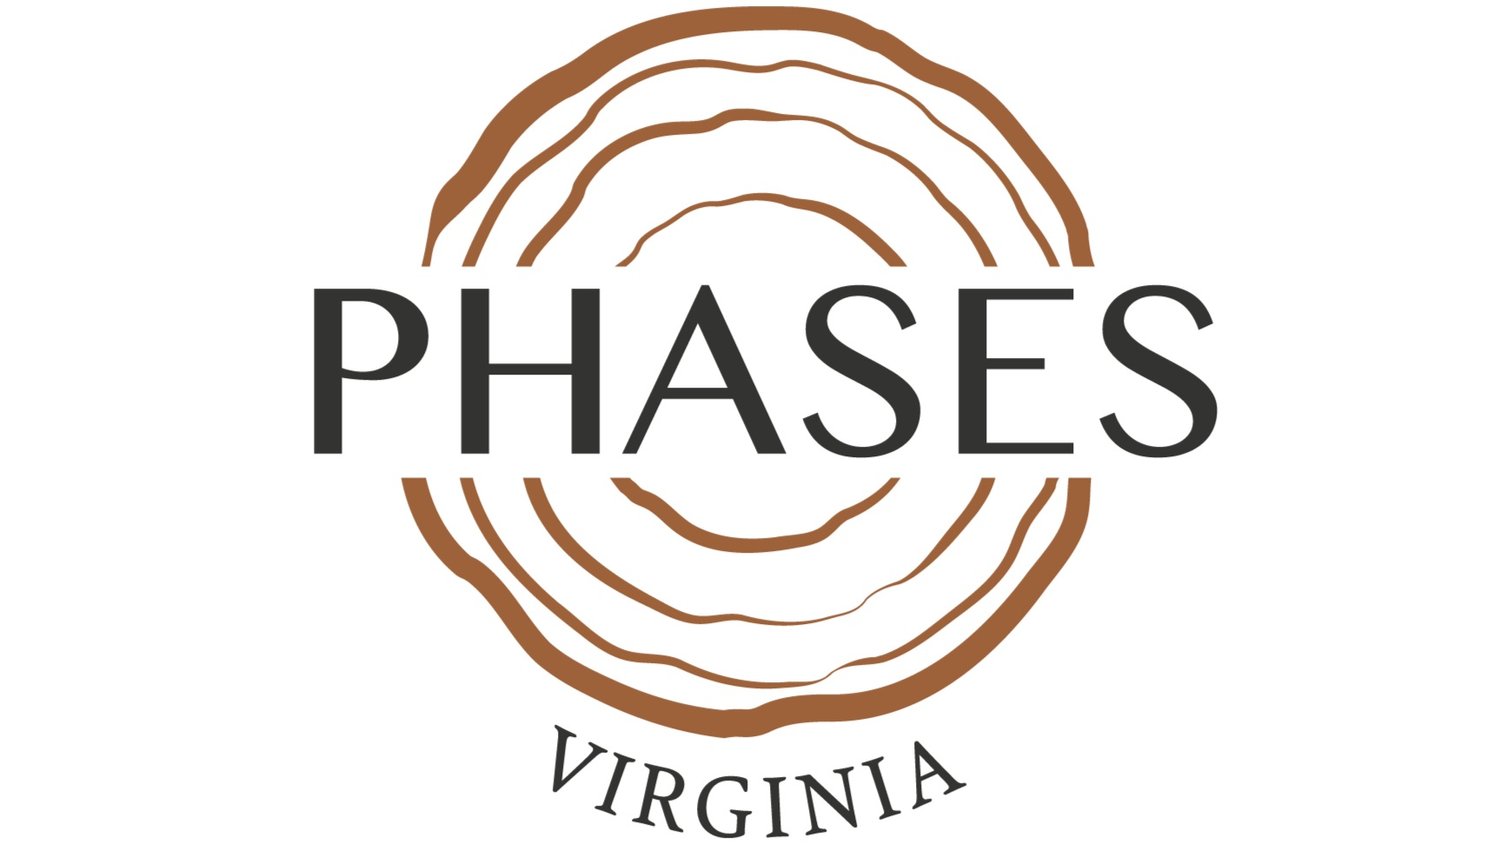 Phases Virginia